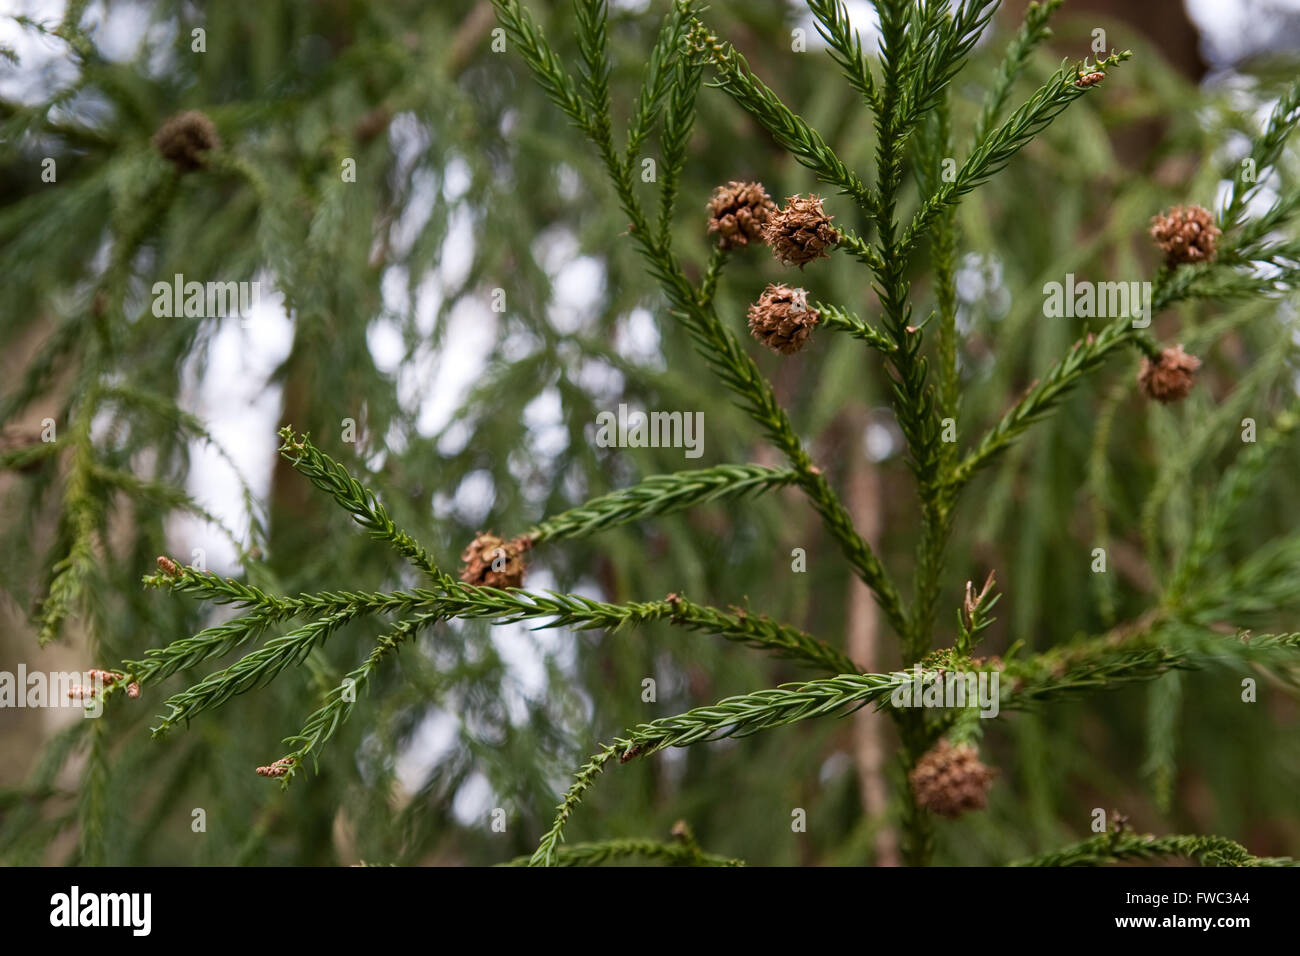 Japanese cedar tree leaves and cones close up Stock Photo